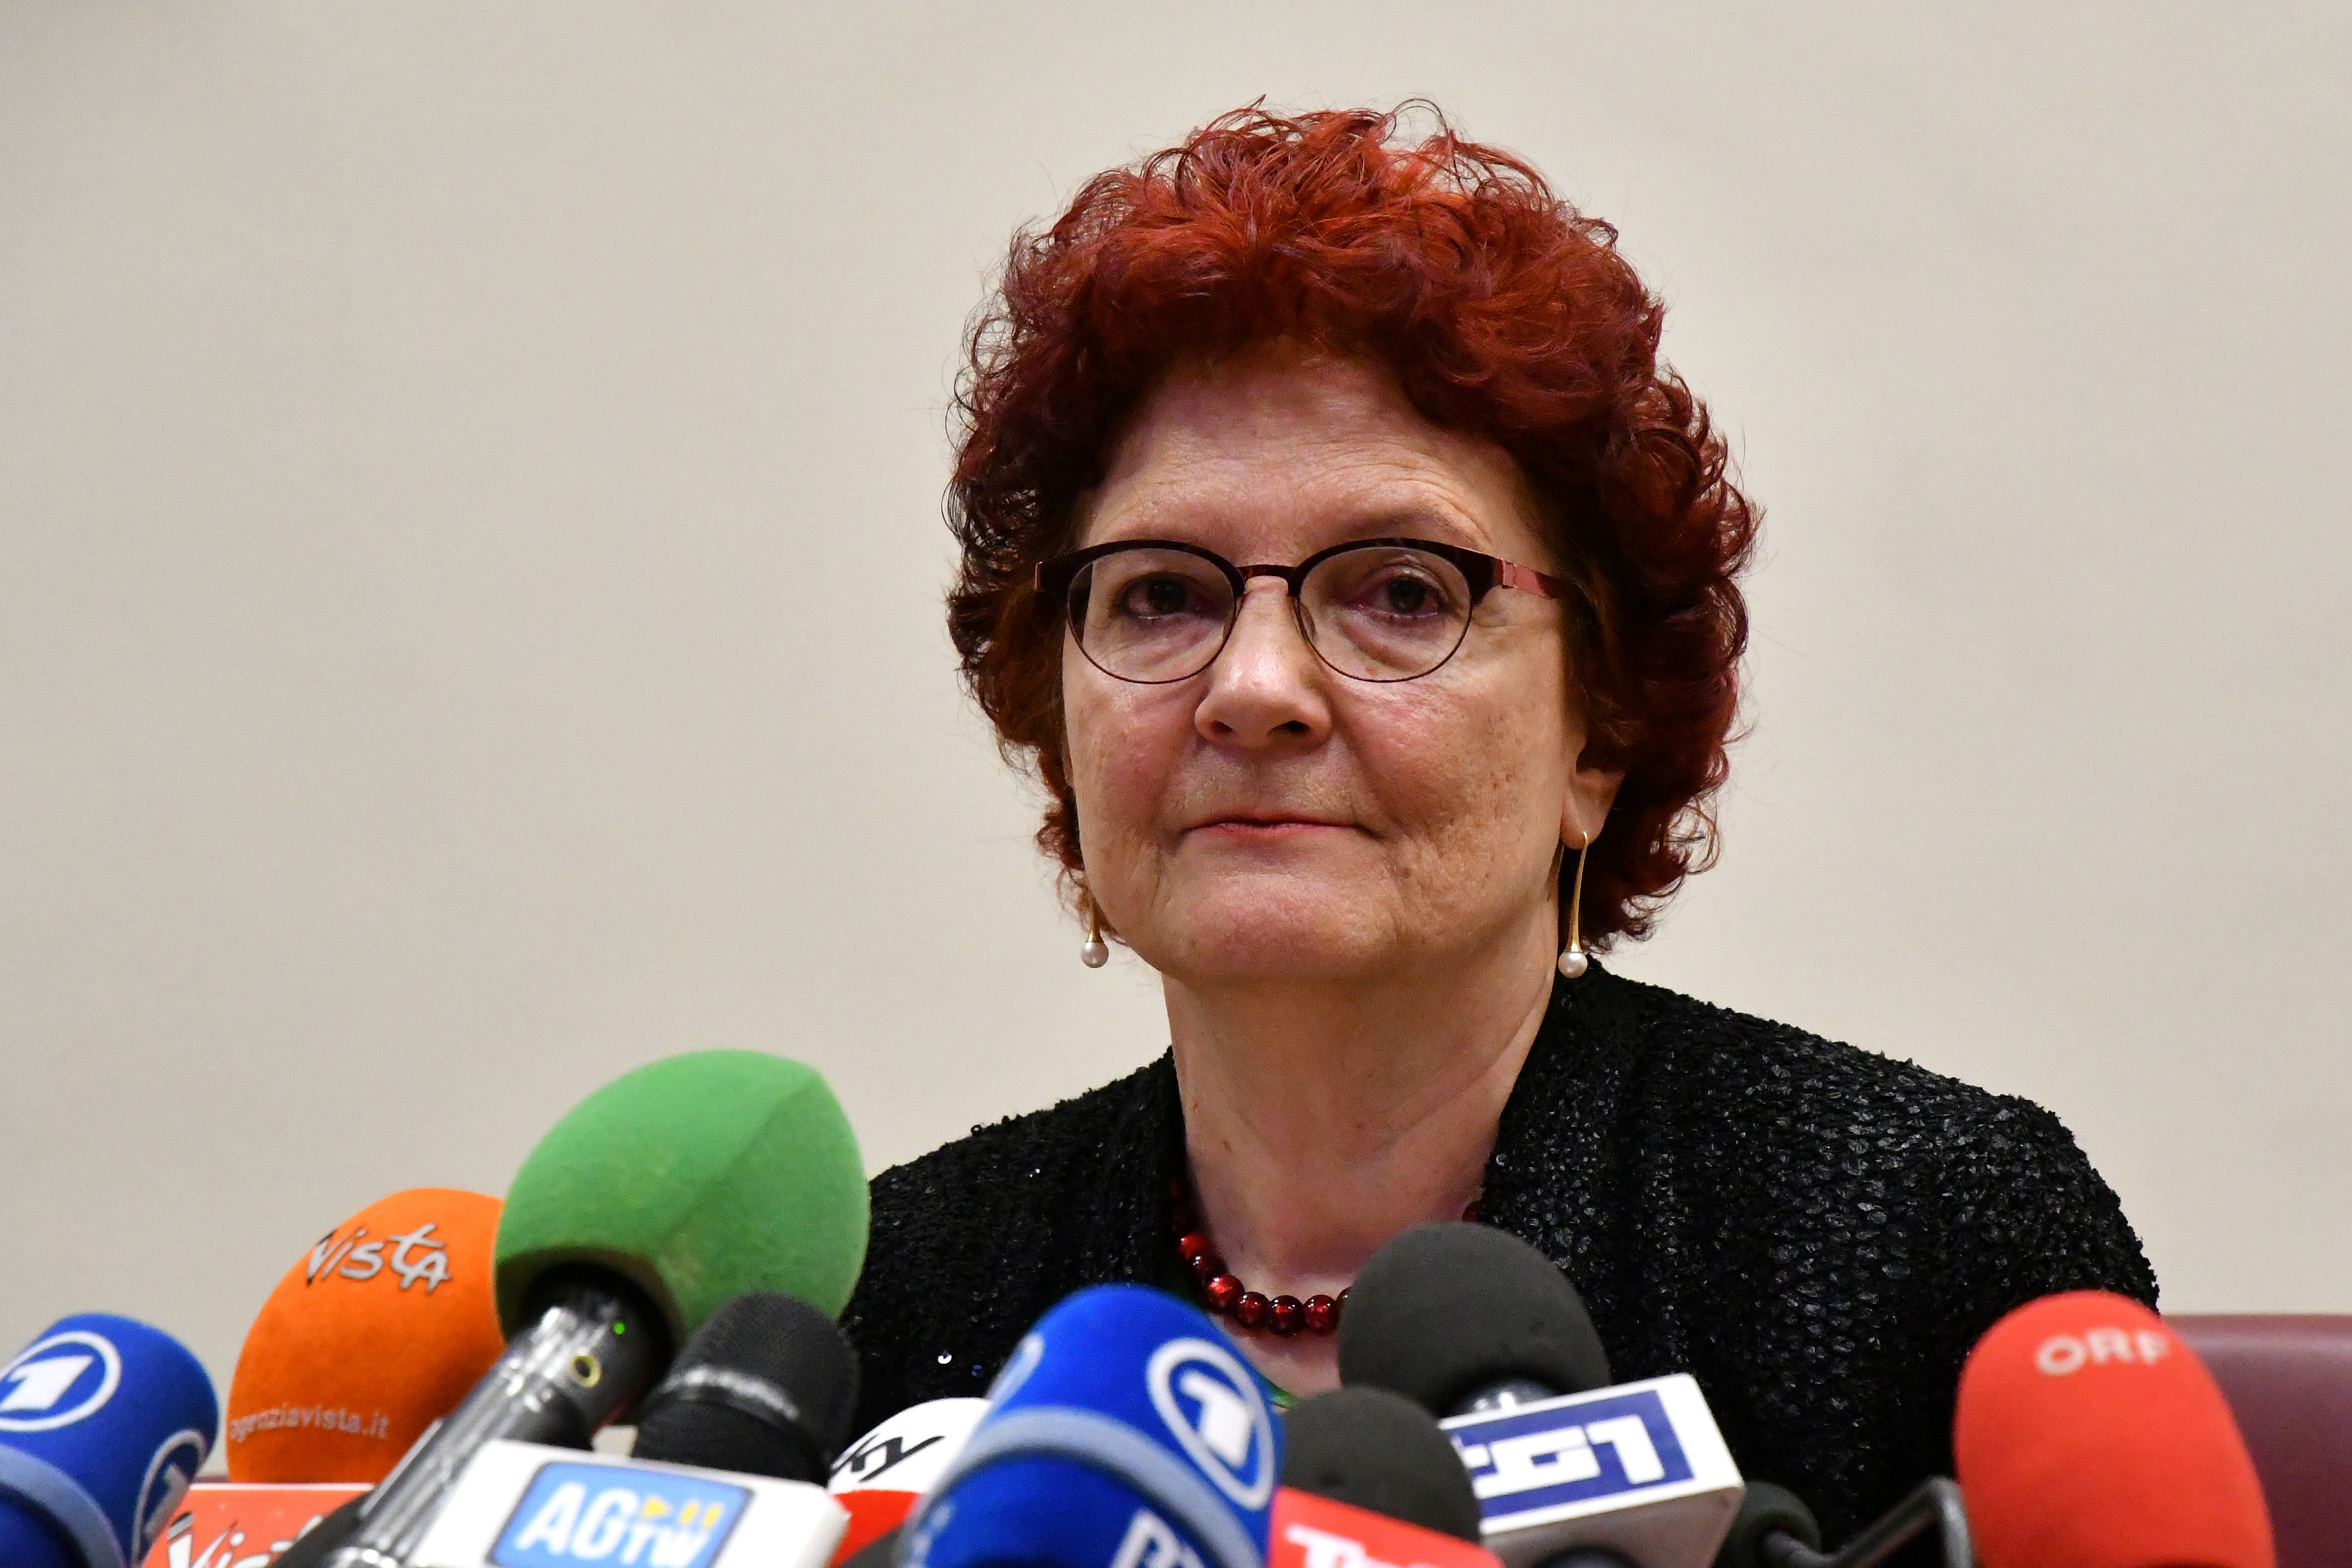 Andrea Ammon director of European Centre for Disease Prevention and Control gives a press conference on the outbreak of Covid-19 also known as Coronavirus in Italy, on February 26, 2020 in Rome. 